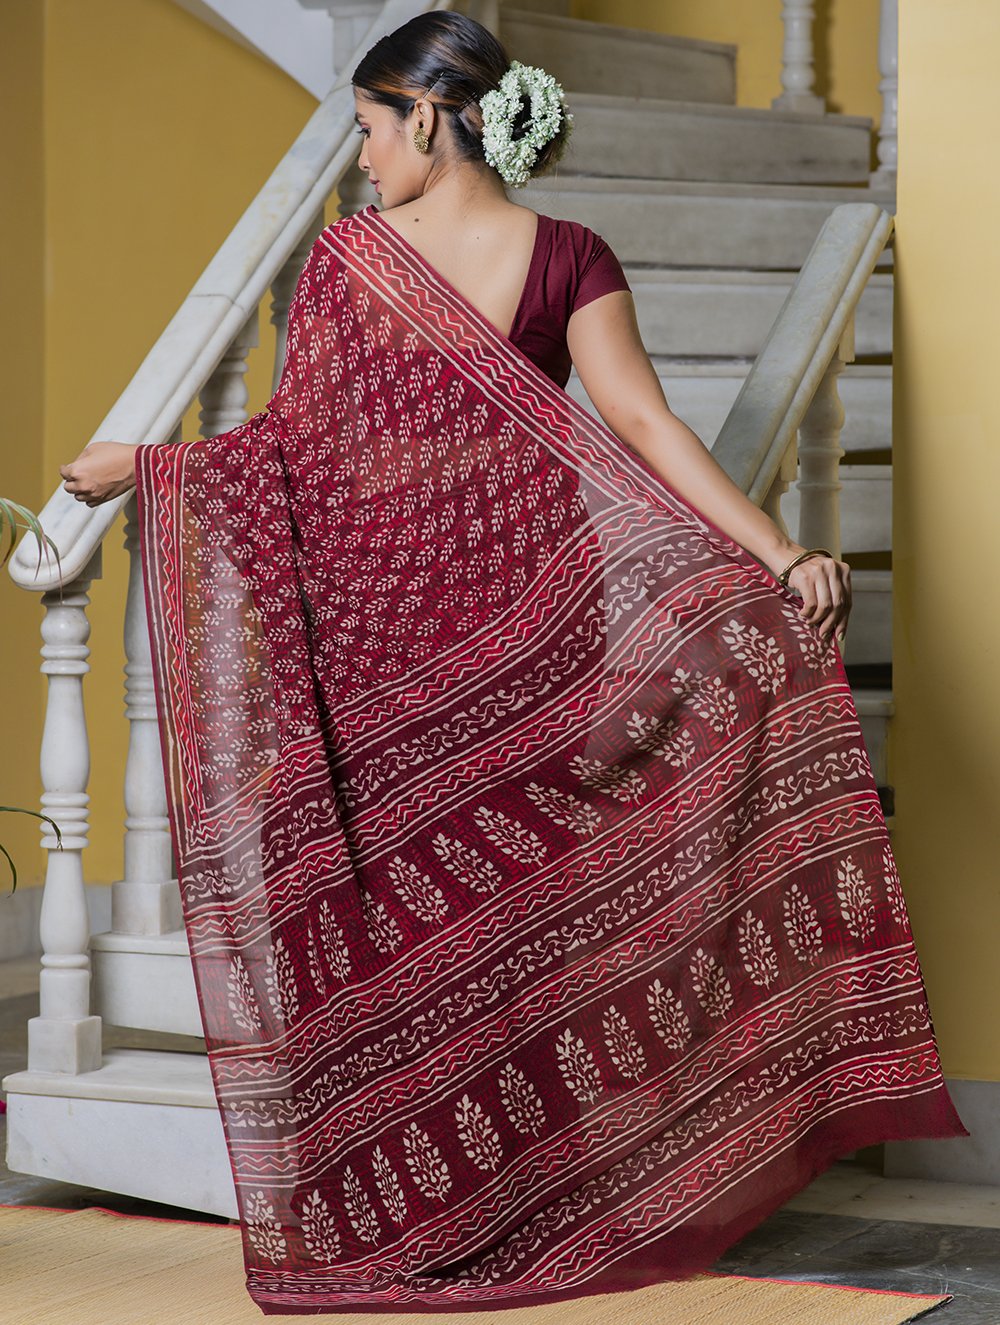 Load image into Gallery viewer, Bagru Block Printed Georgette Saree - Leaves (With Blouse Piece)